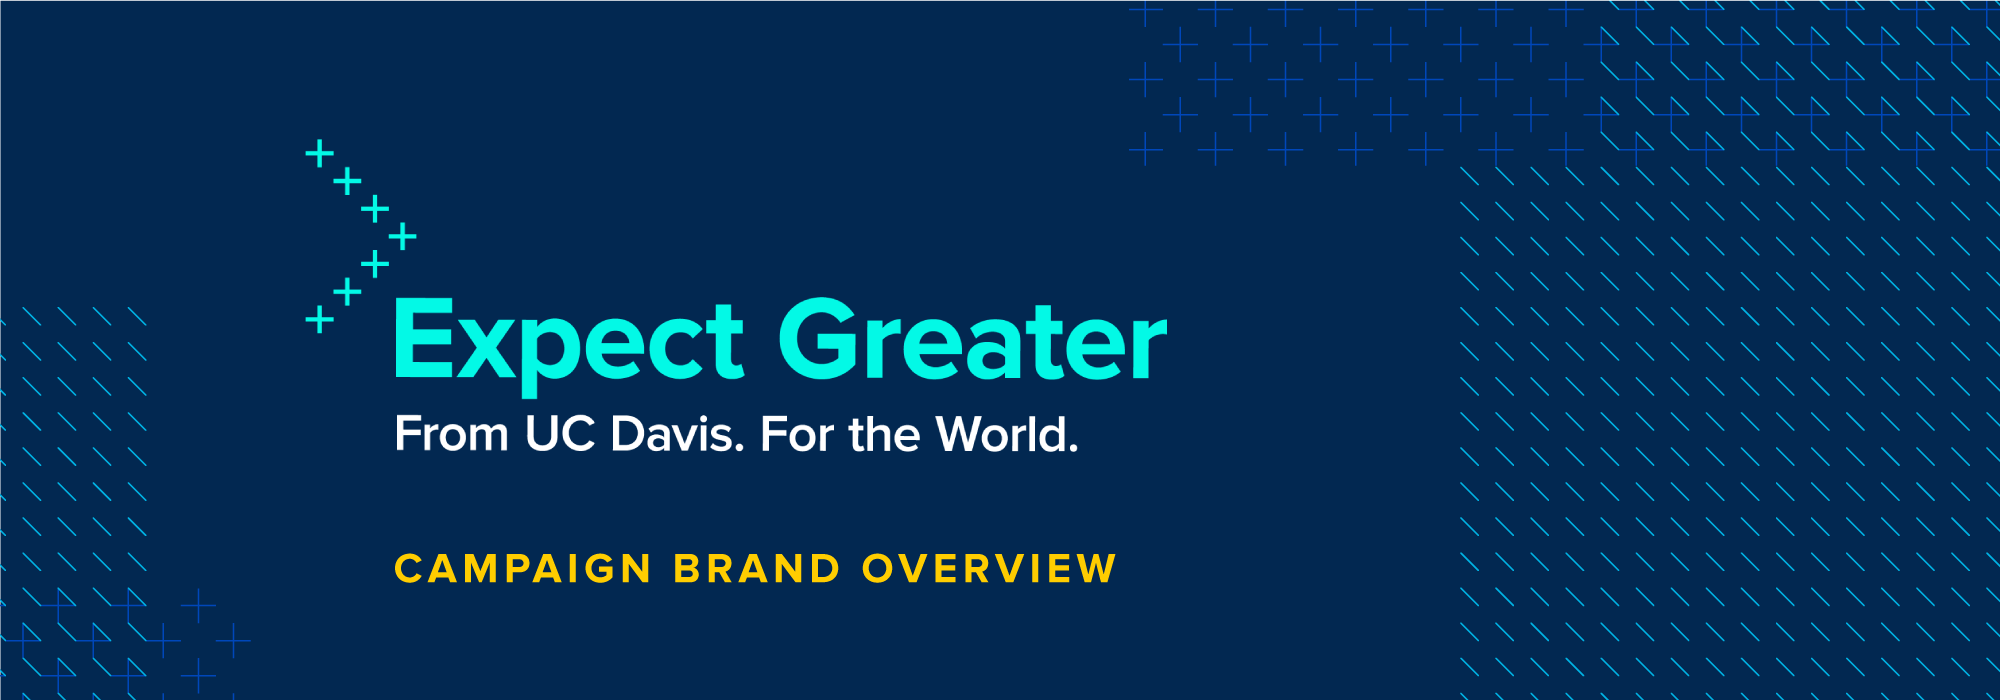 Expect Greater: Campaign Brand Overview